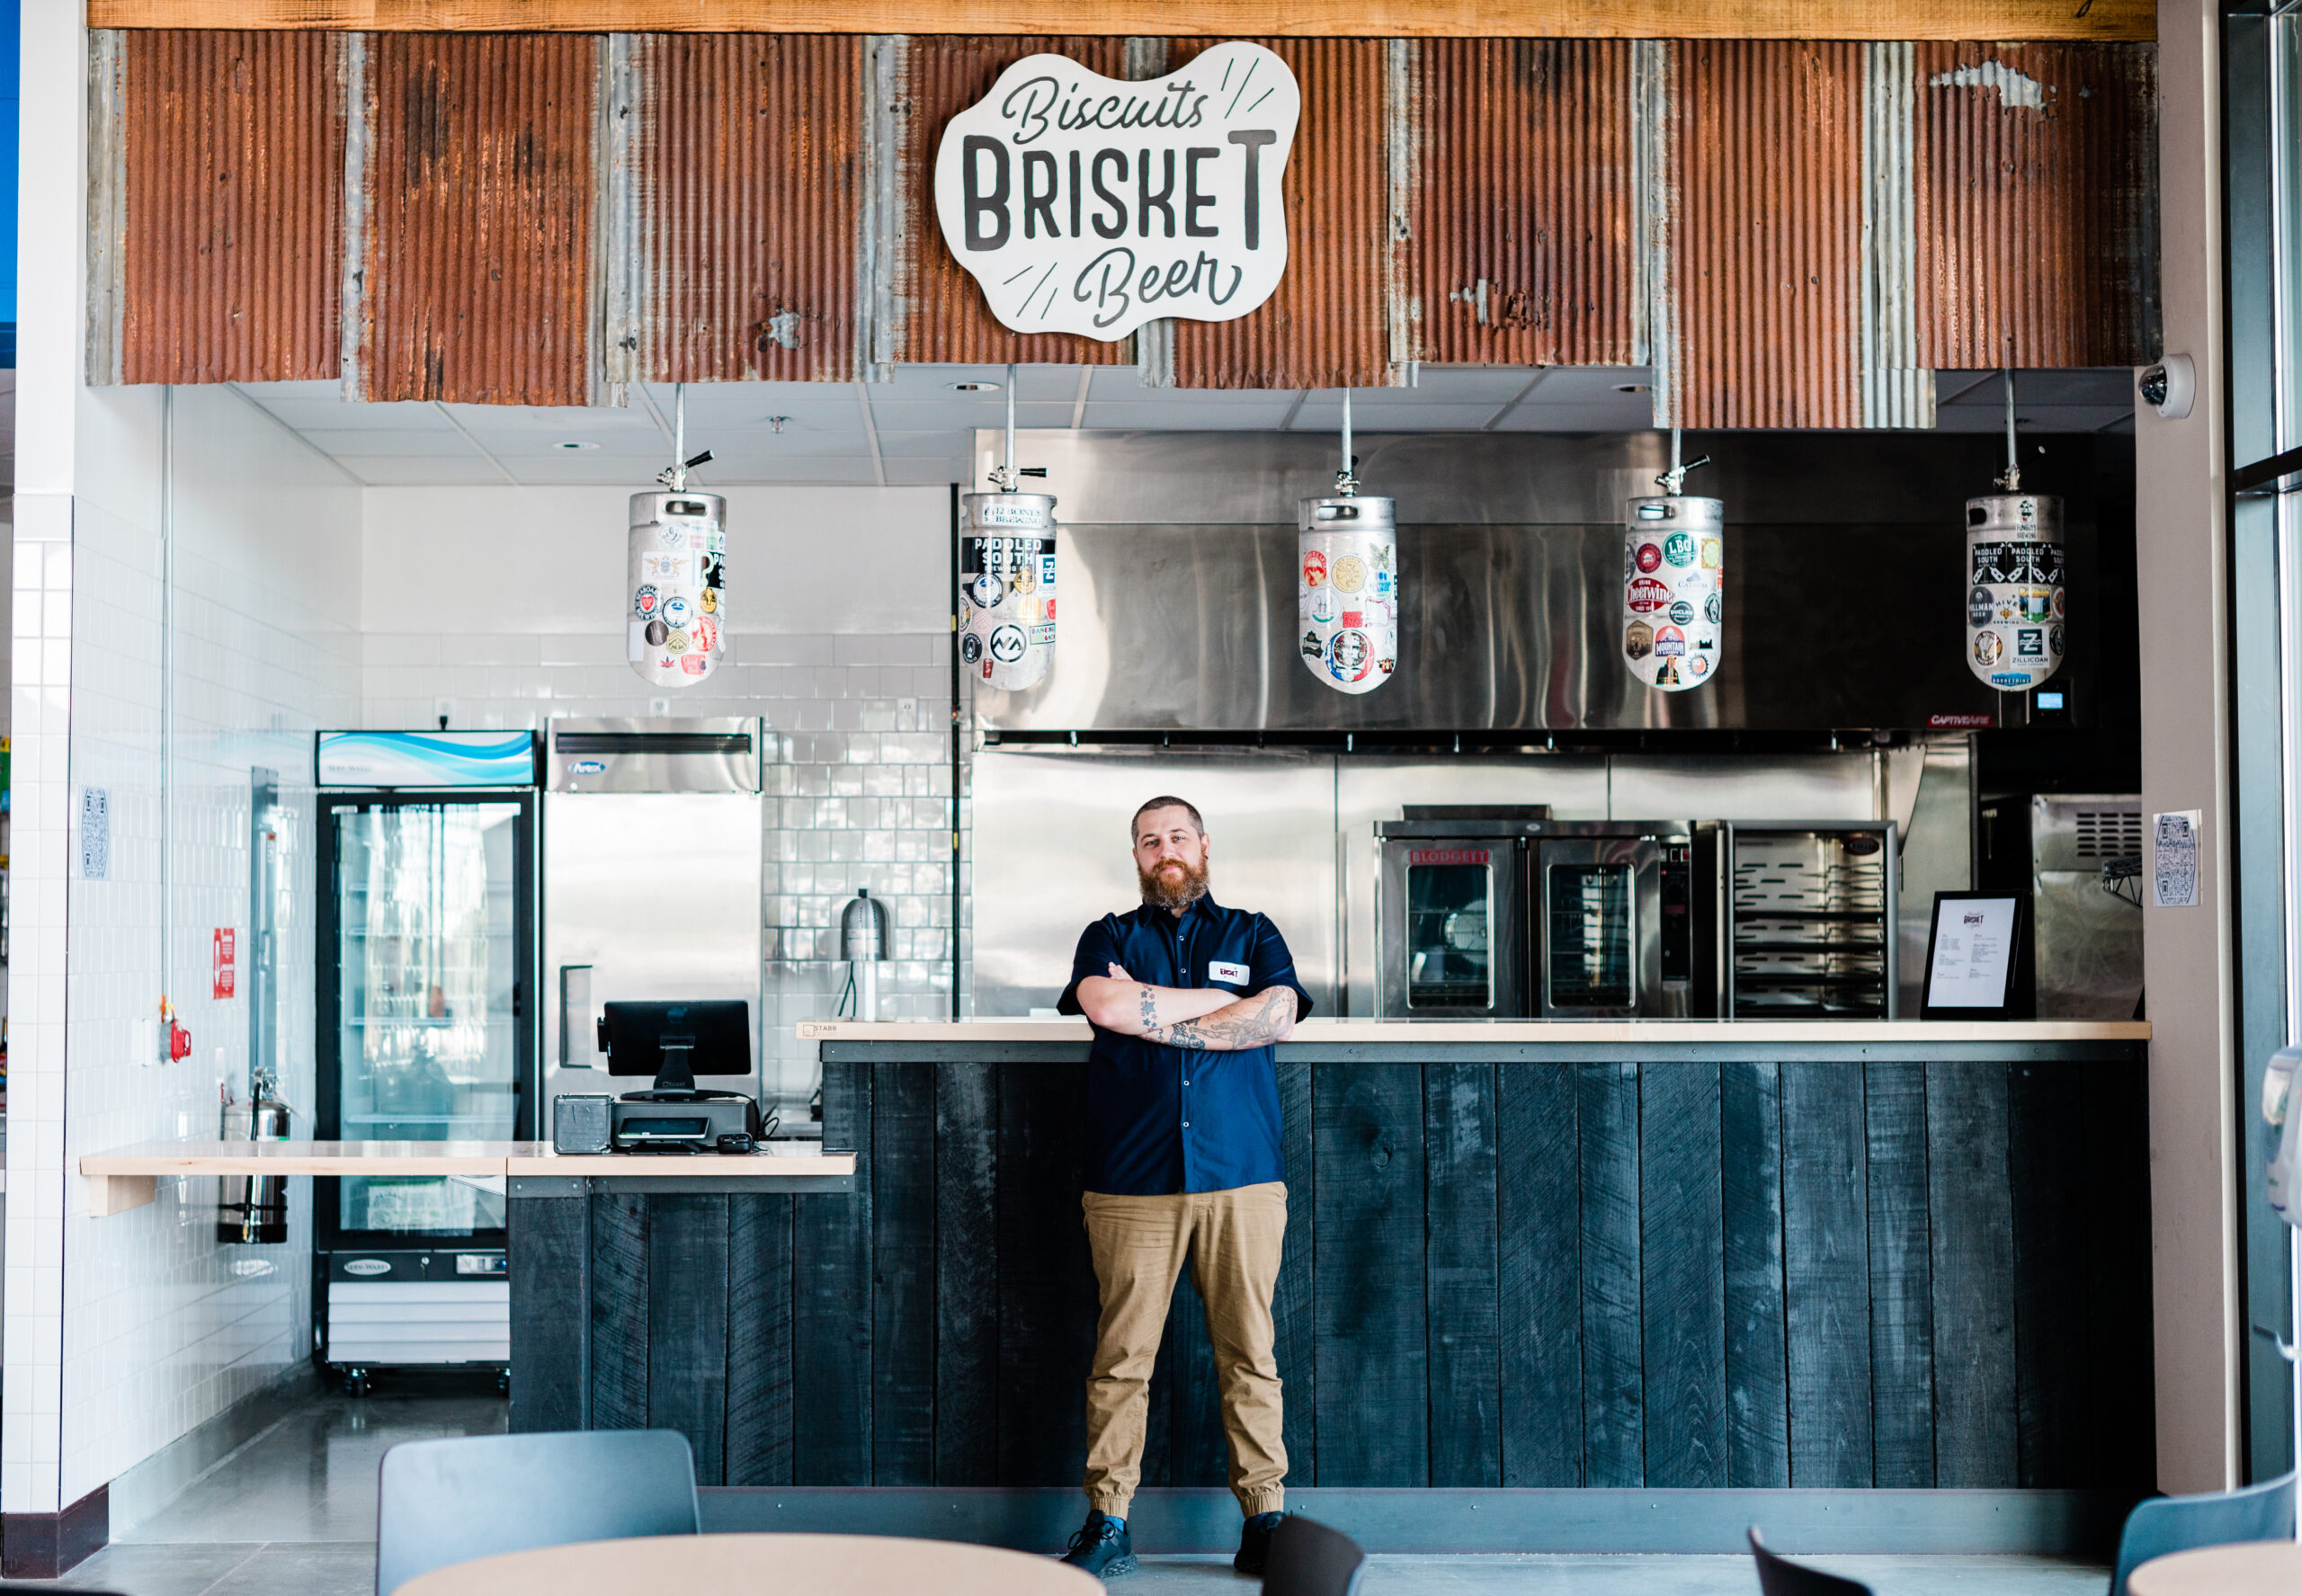 Chris Ryker, owner of Biscuits Brisket & Beer stands in front of his restaurant in High Point, NC at the food hall, Stock+Grain Assembly.